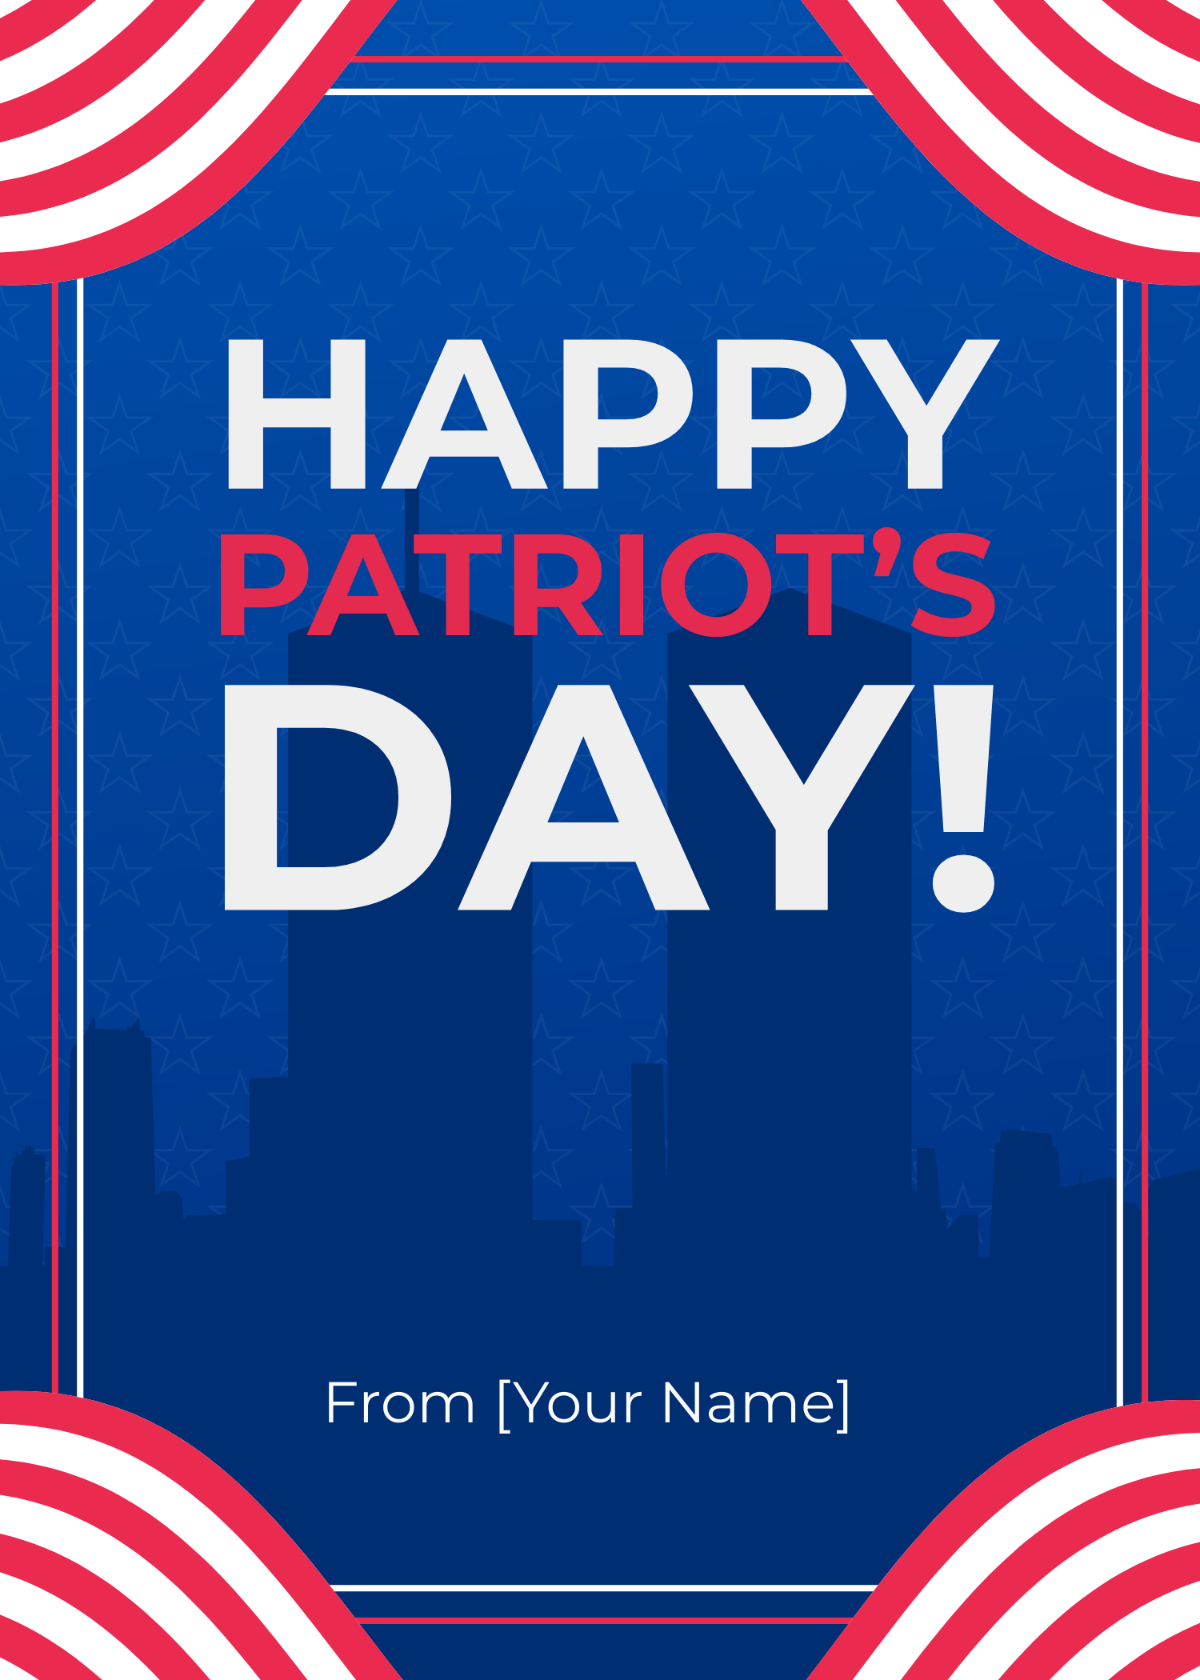 Free Happy Patriot's Day Template